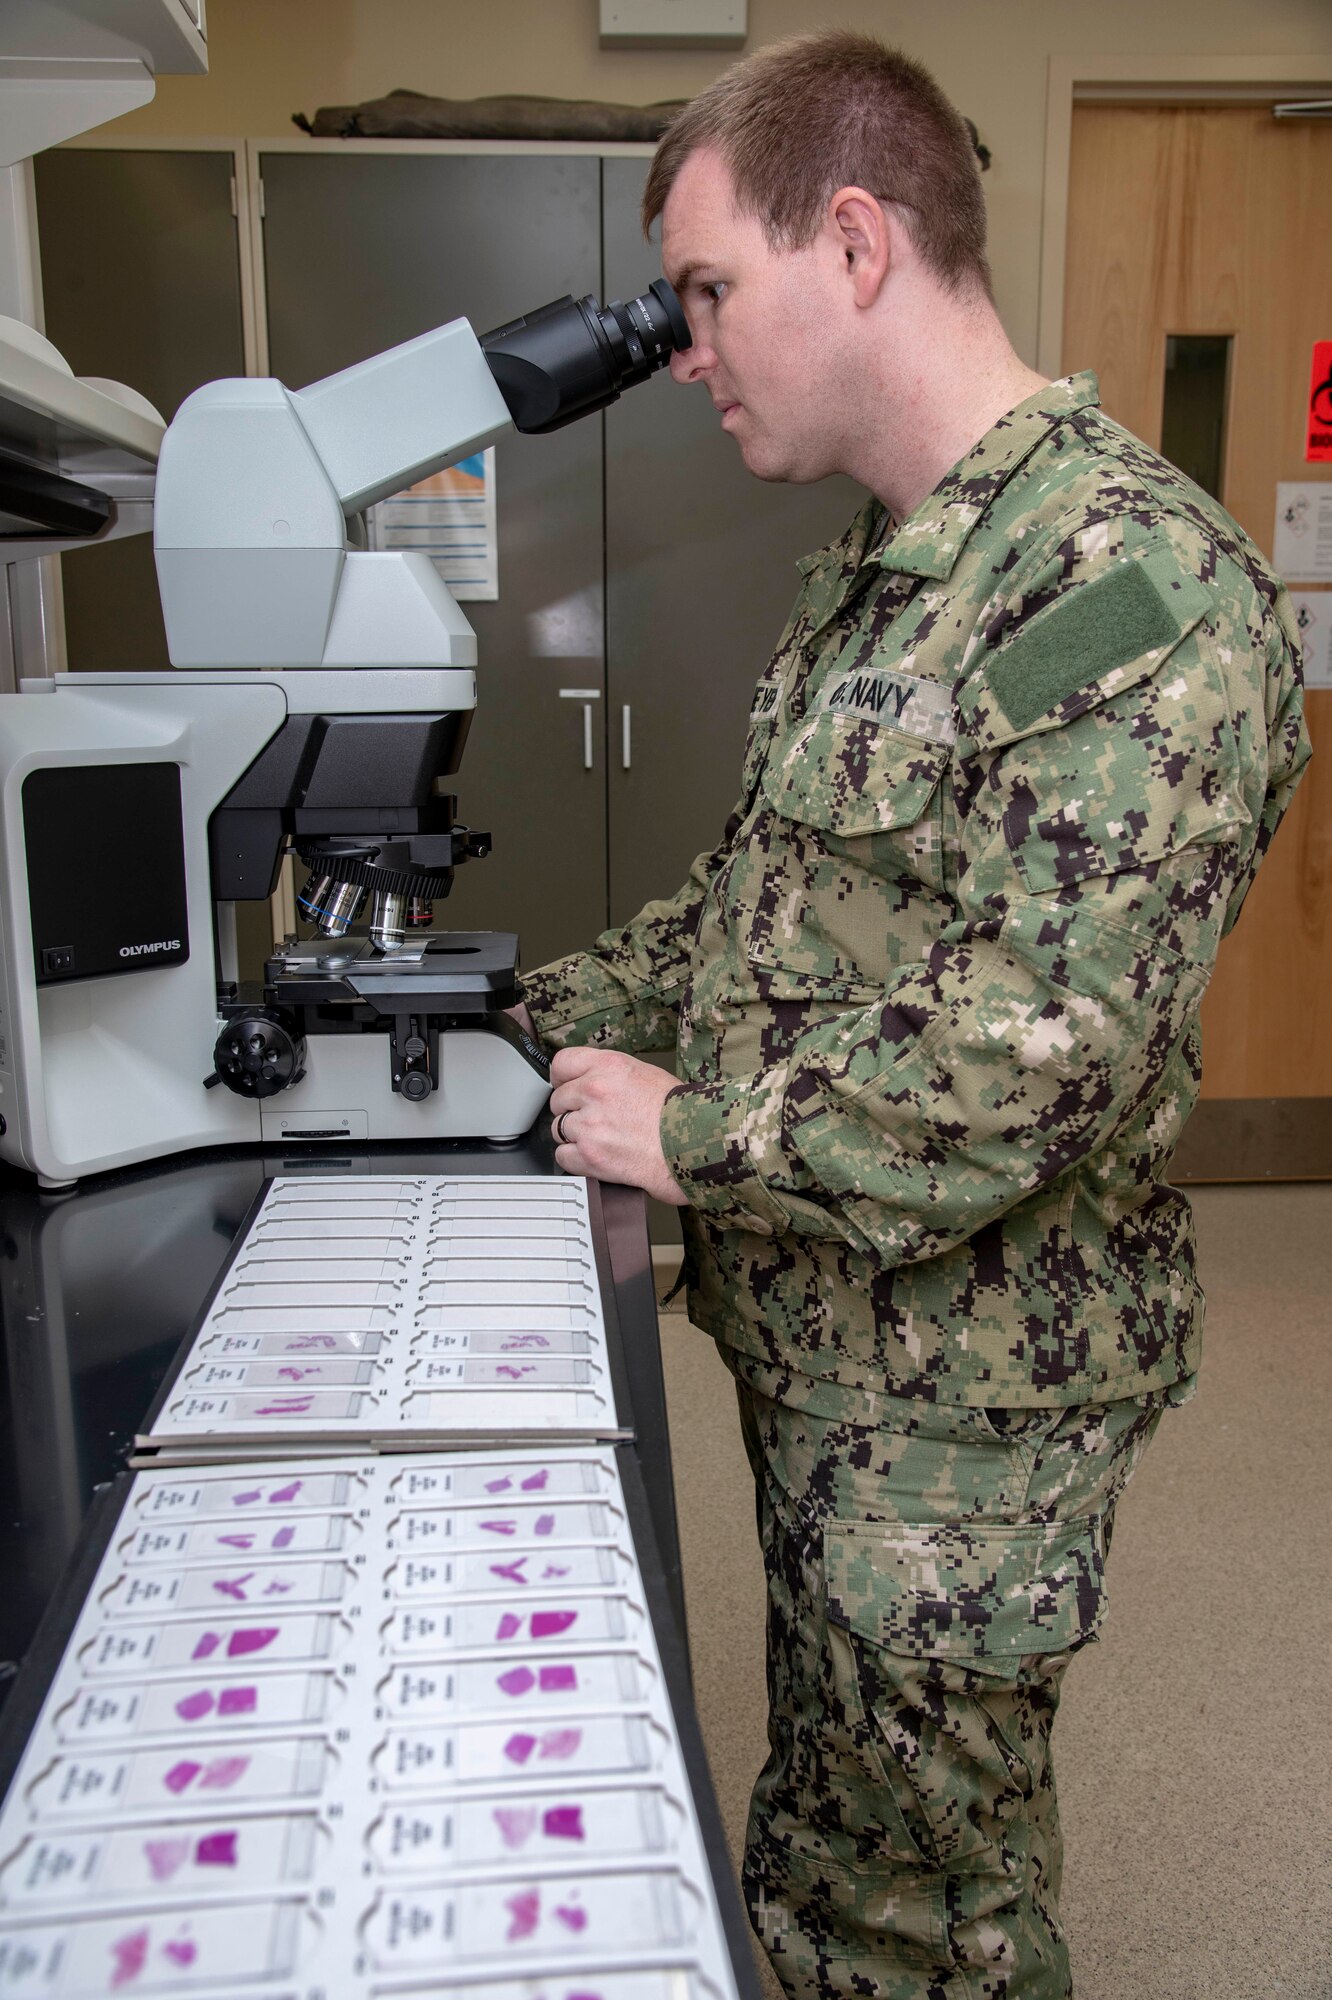 U.S. Navy Petty Officer 2nd Class Tyler Wiedmeyer, Armed Forces Medical Examiner System histotechnichian, looks at slides of tissues under a microscope before handing them off to a medical examiner June 6, 2019. The stained tissues help medical examiners see down to the cellular level for a  diagnosis of cause of death. (U.S. Air Force photo by Staff Sgt. Nicole Leidholm)